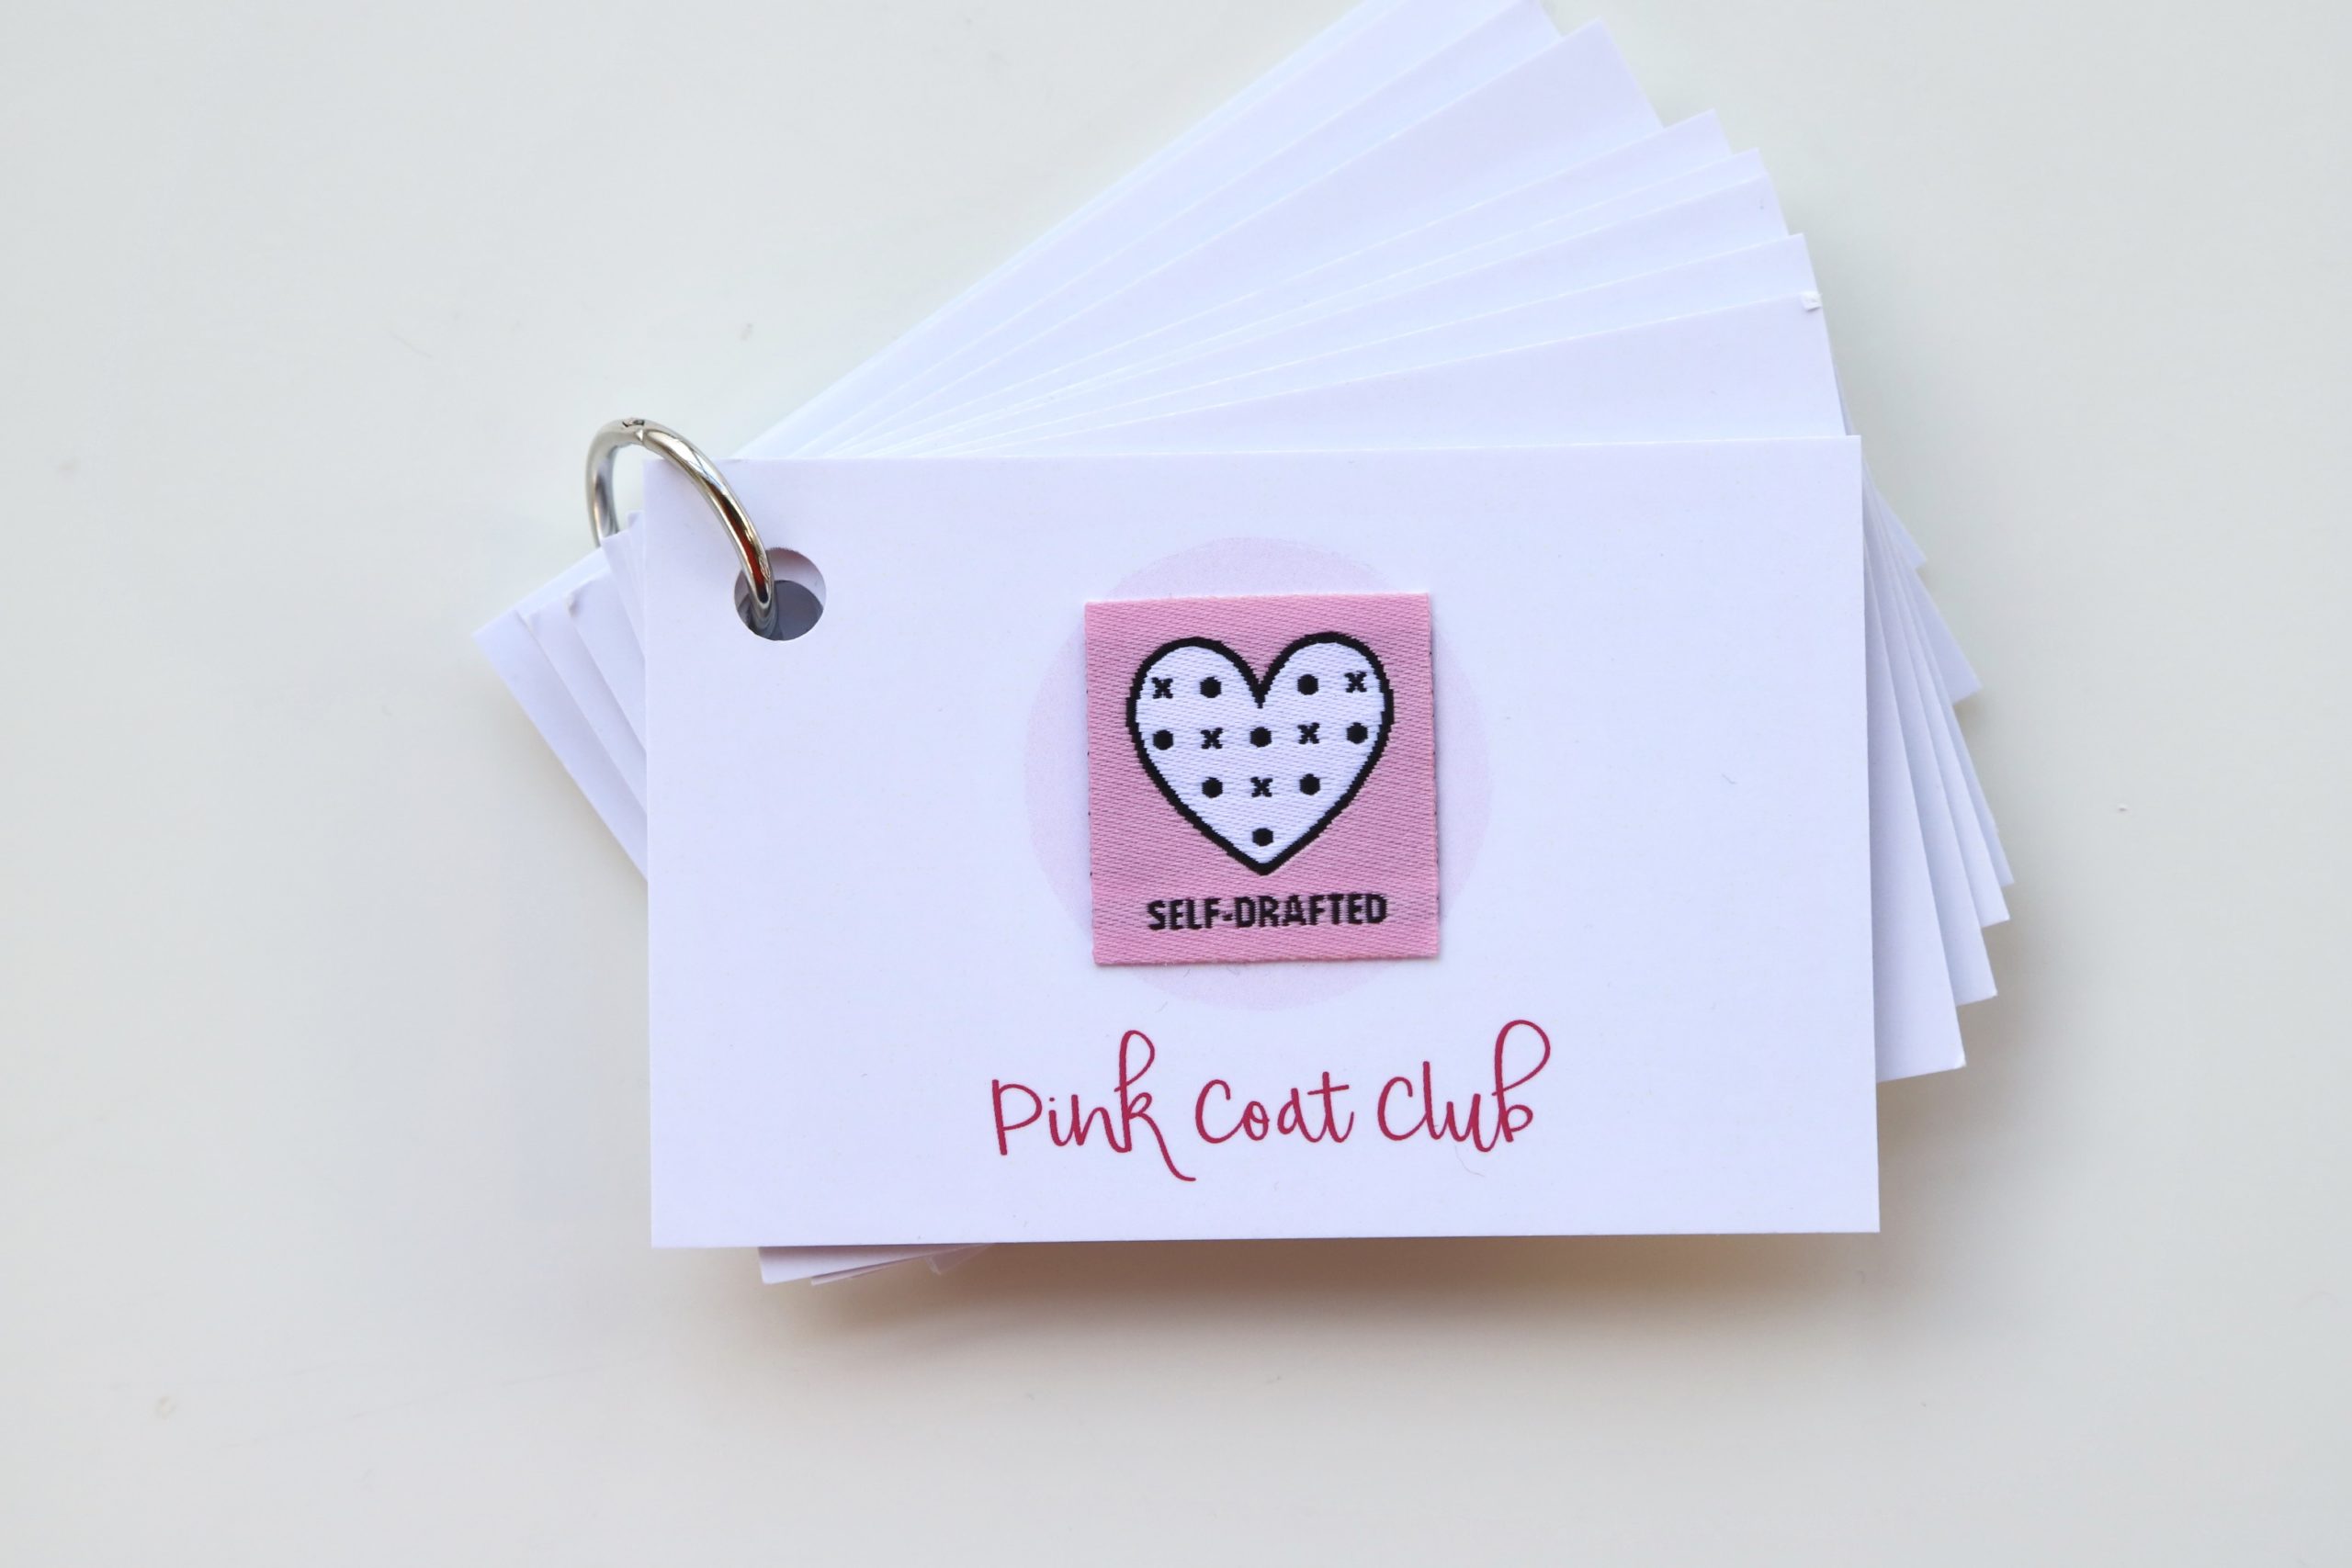 Self-Drafted – 6 Garment Labels by Pink Coat Club